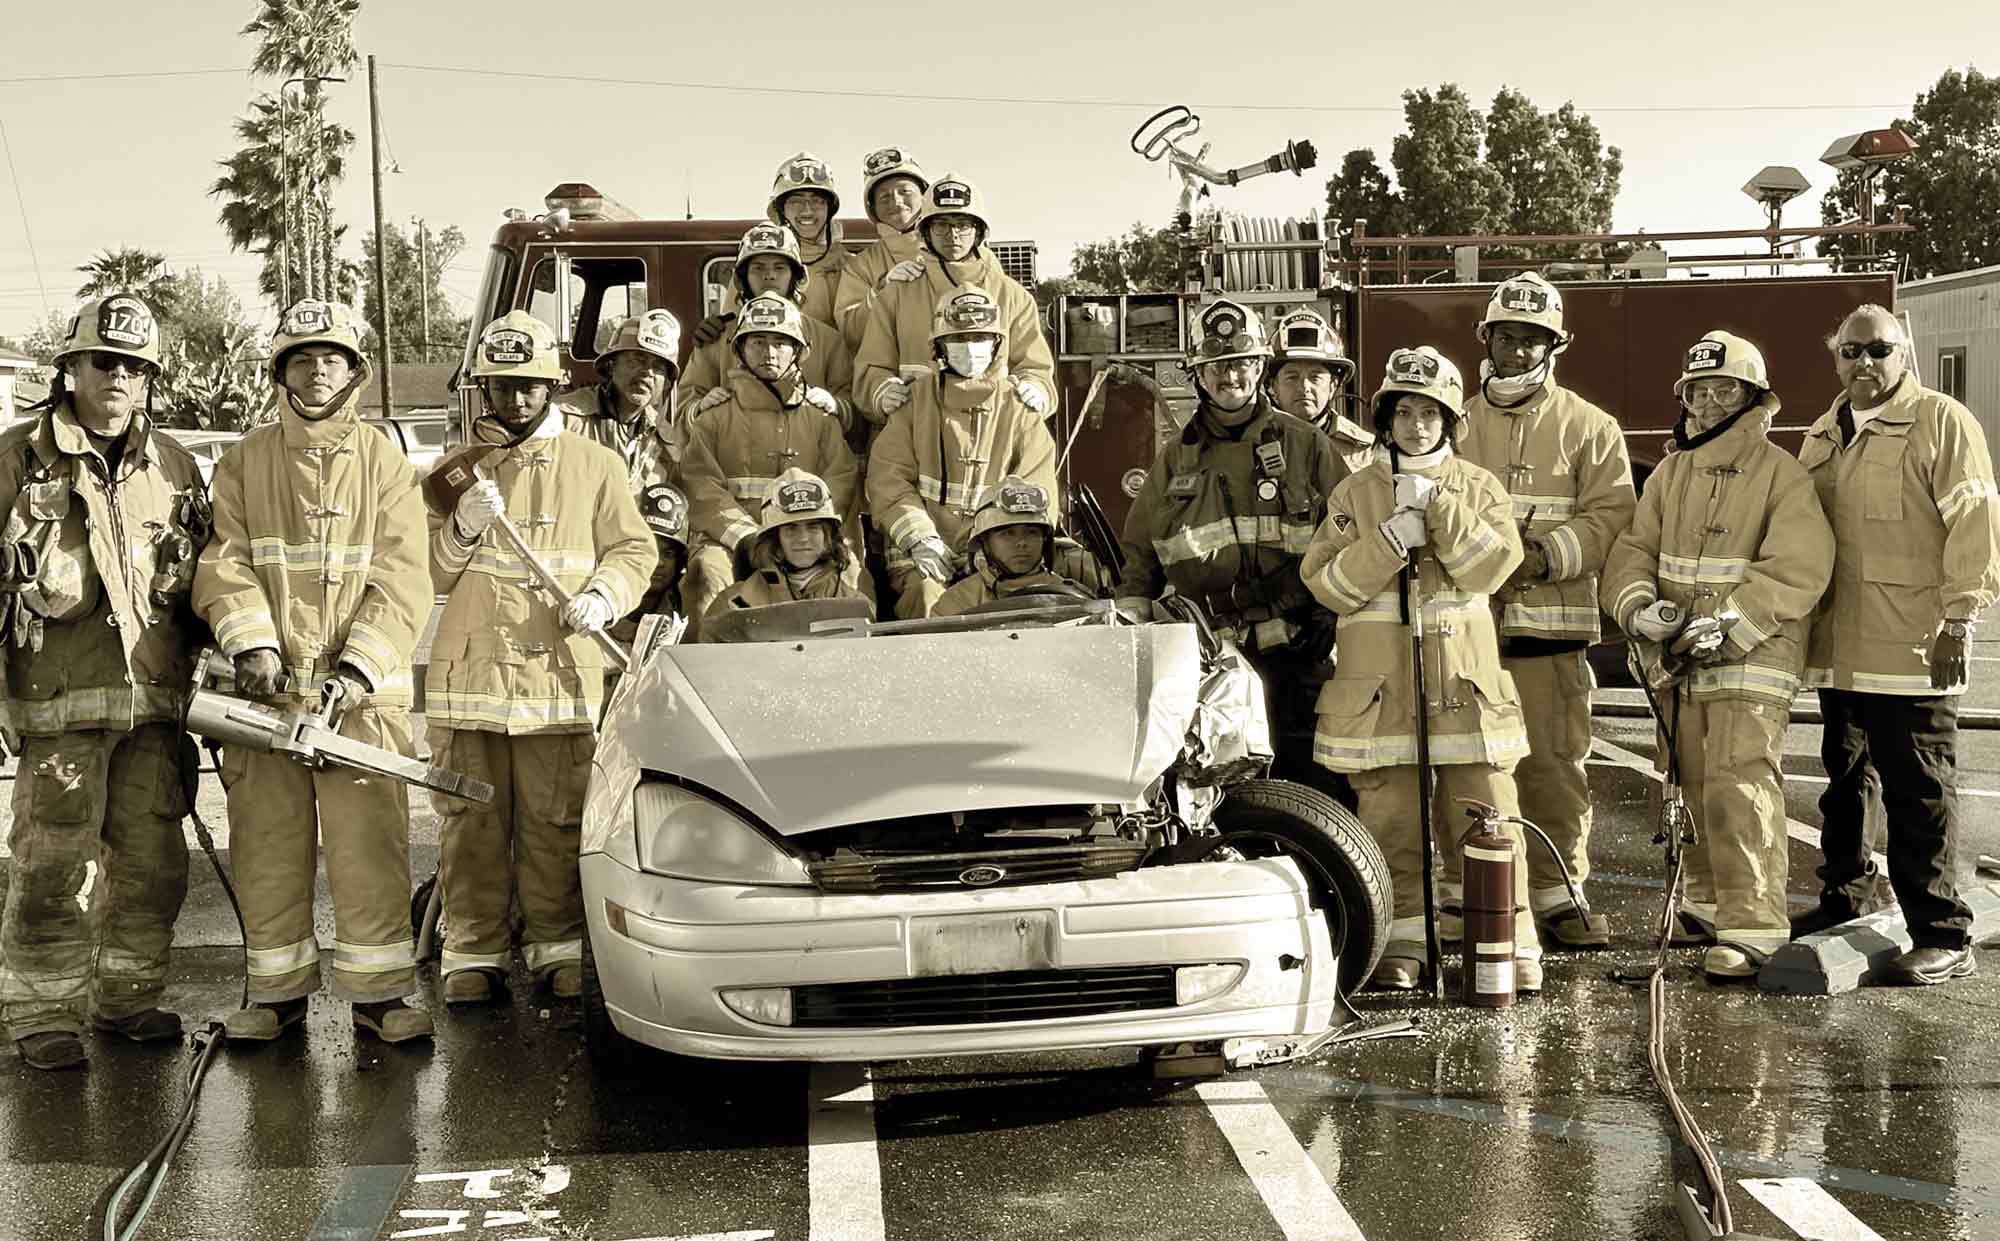 Advanced Pathways firefighters posing for a photo next to a wrecked car